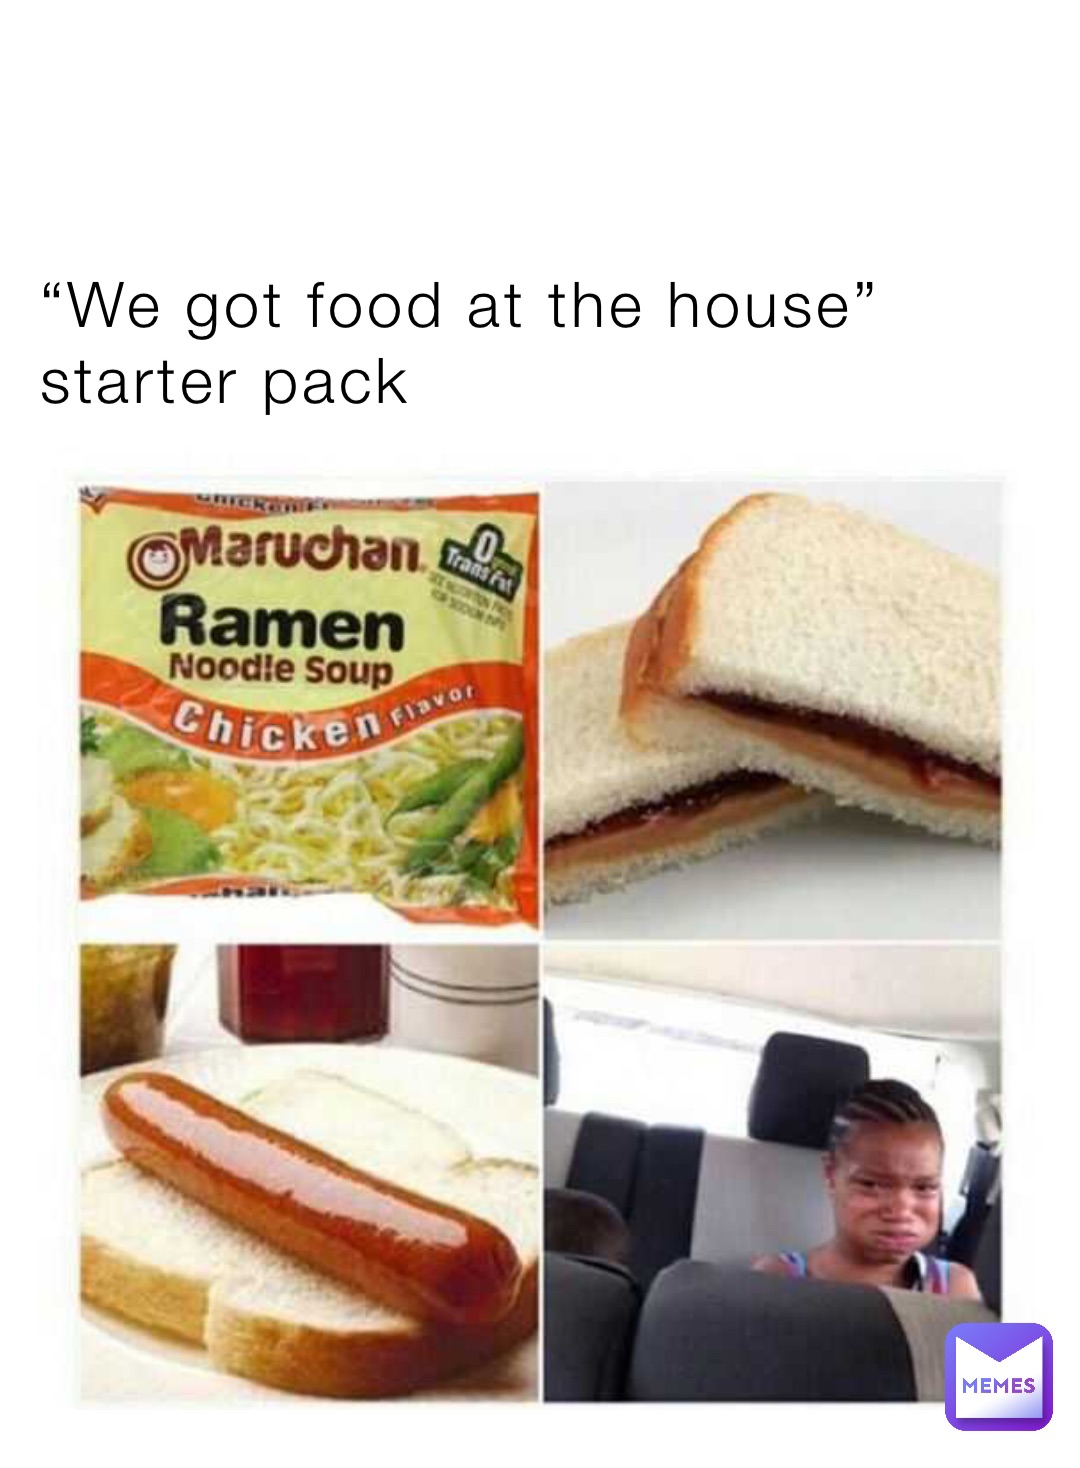 “We got food at the house” starter pack